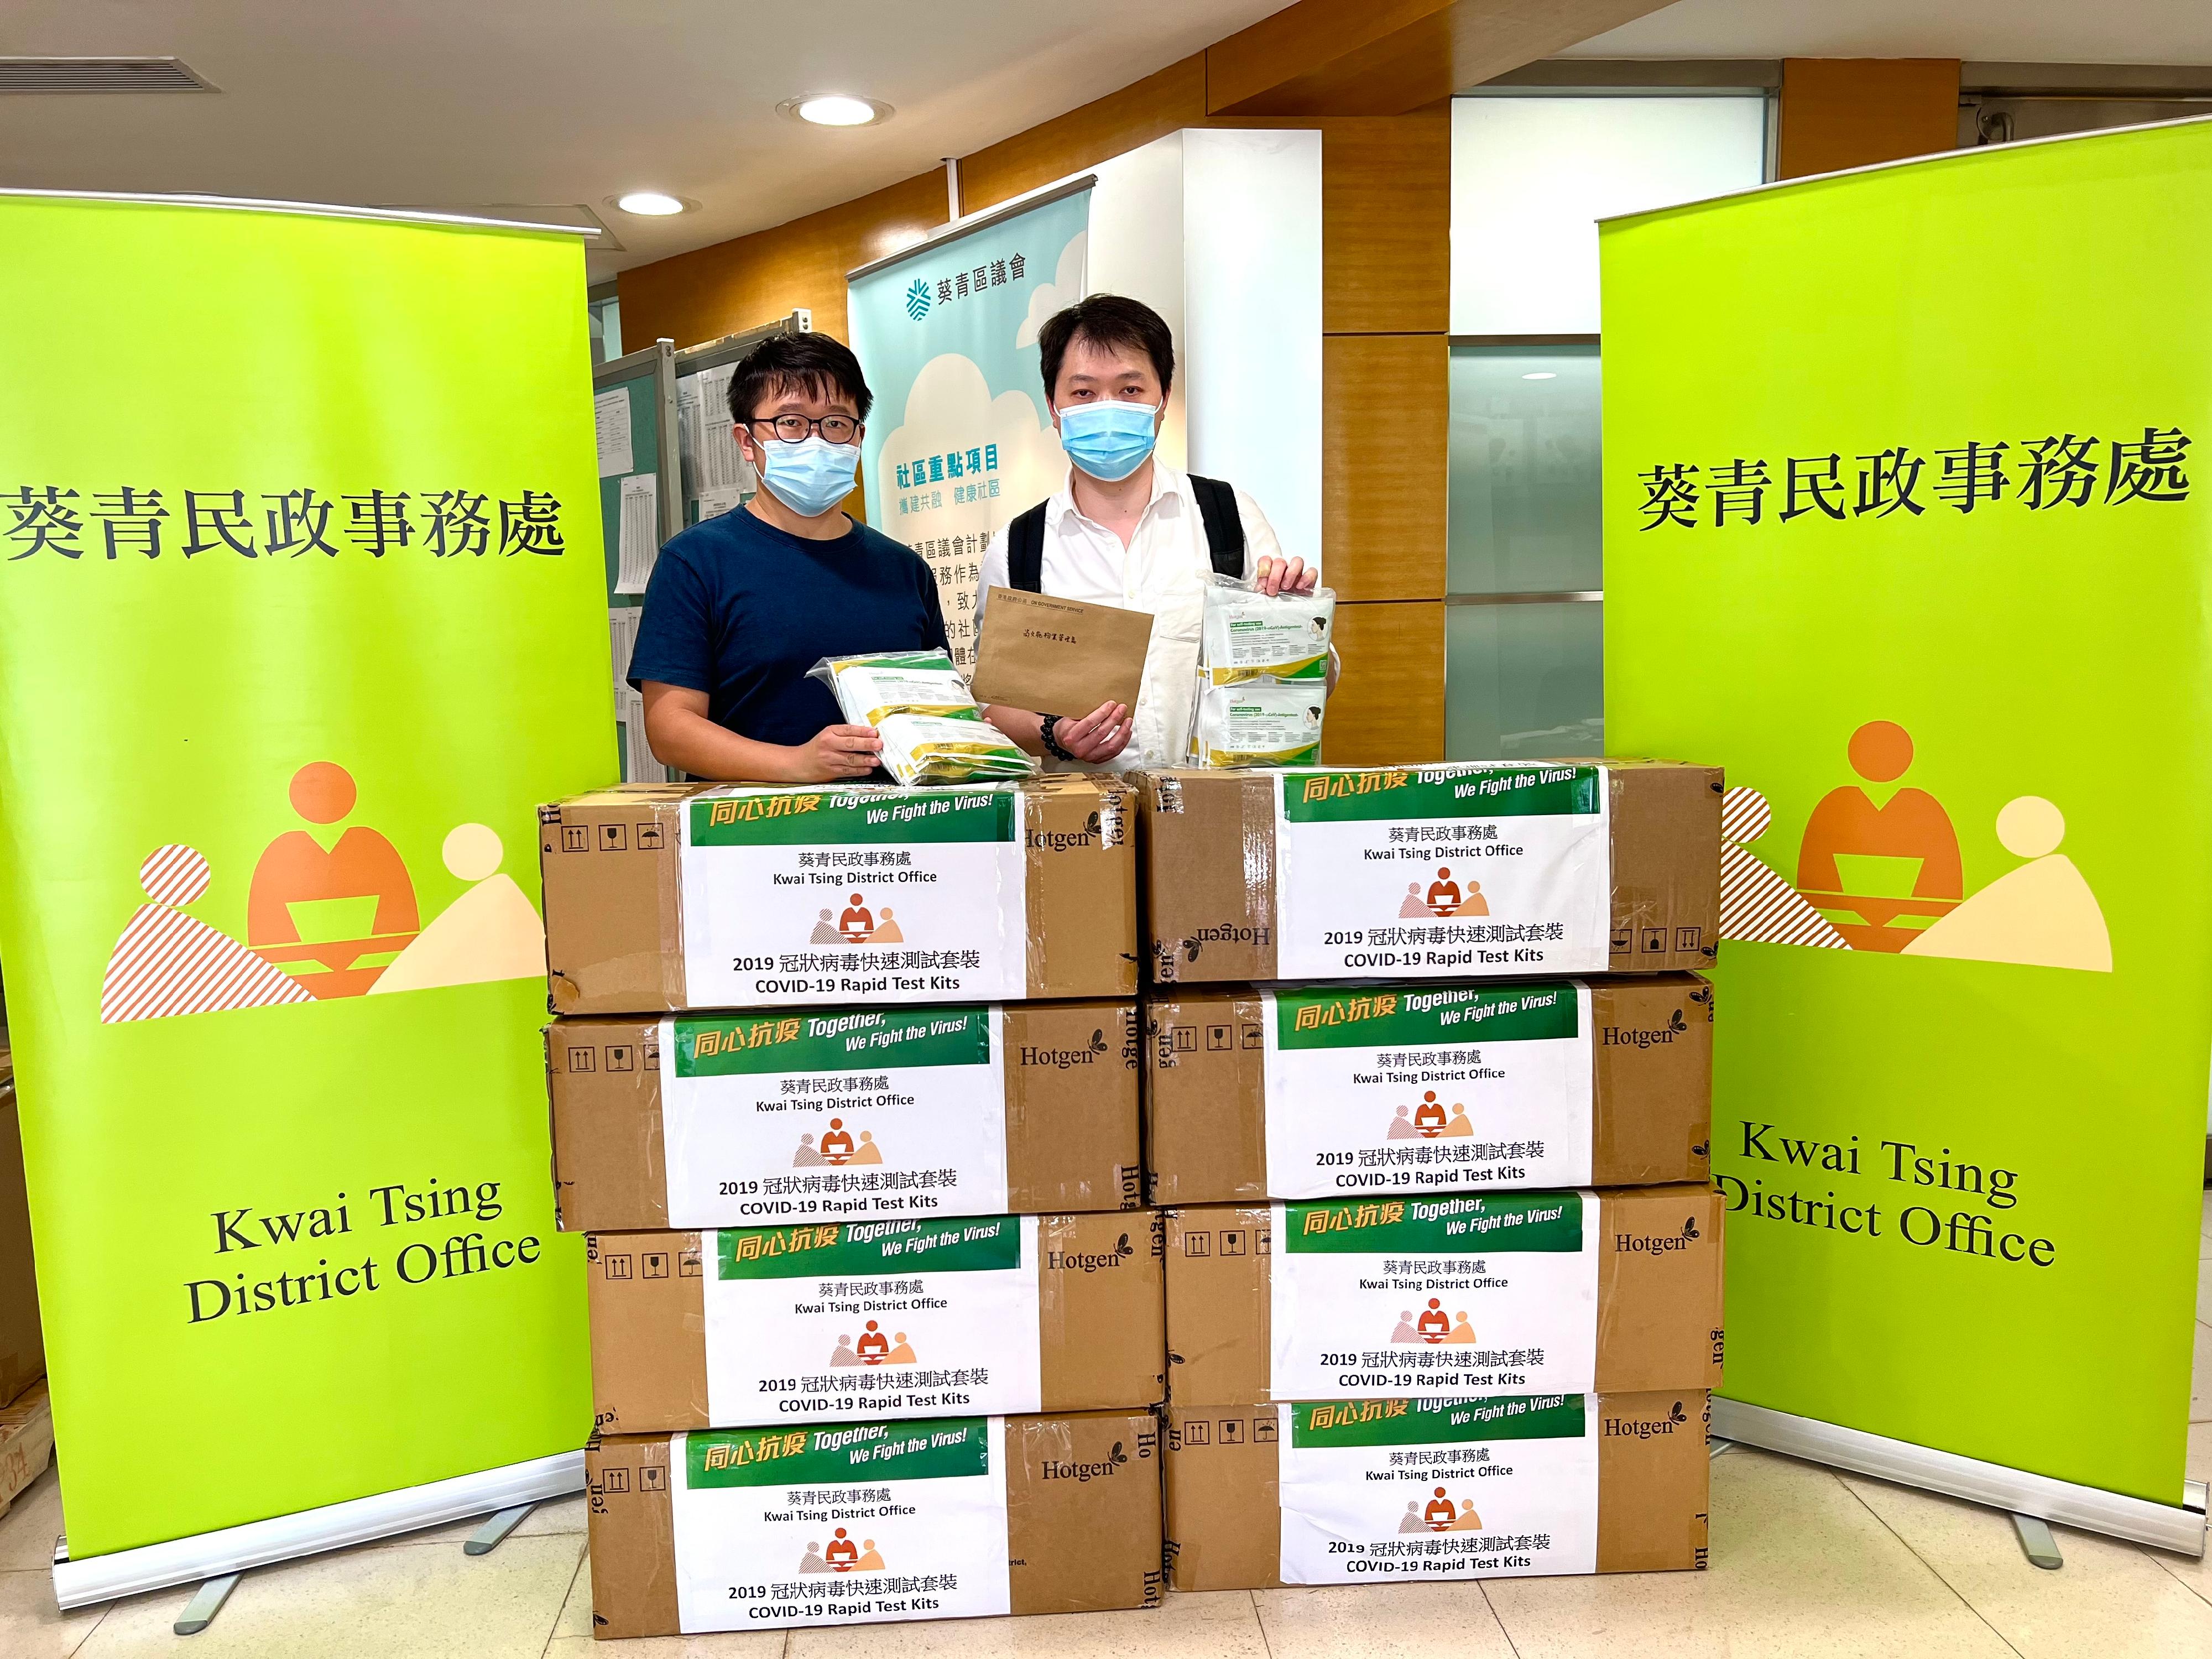 The Kwai Tsing District Office today (May 5) distributed COVID-19 rapid test kits to households, cleansing workers and property management staff living and working in Sheung Man Court for voluntary testing through the property management company.